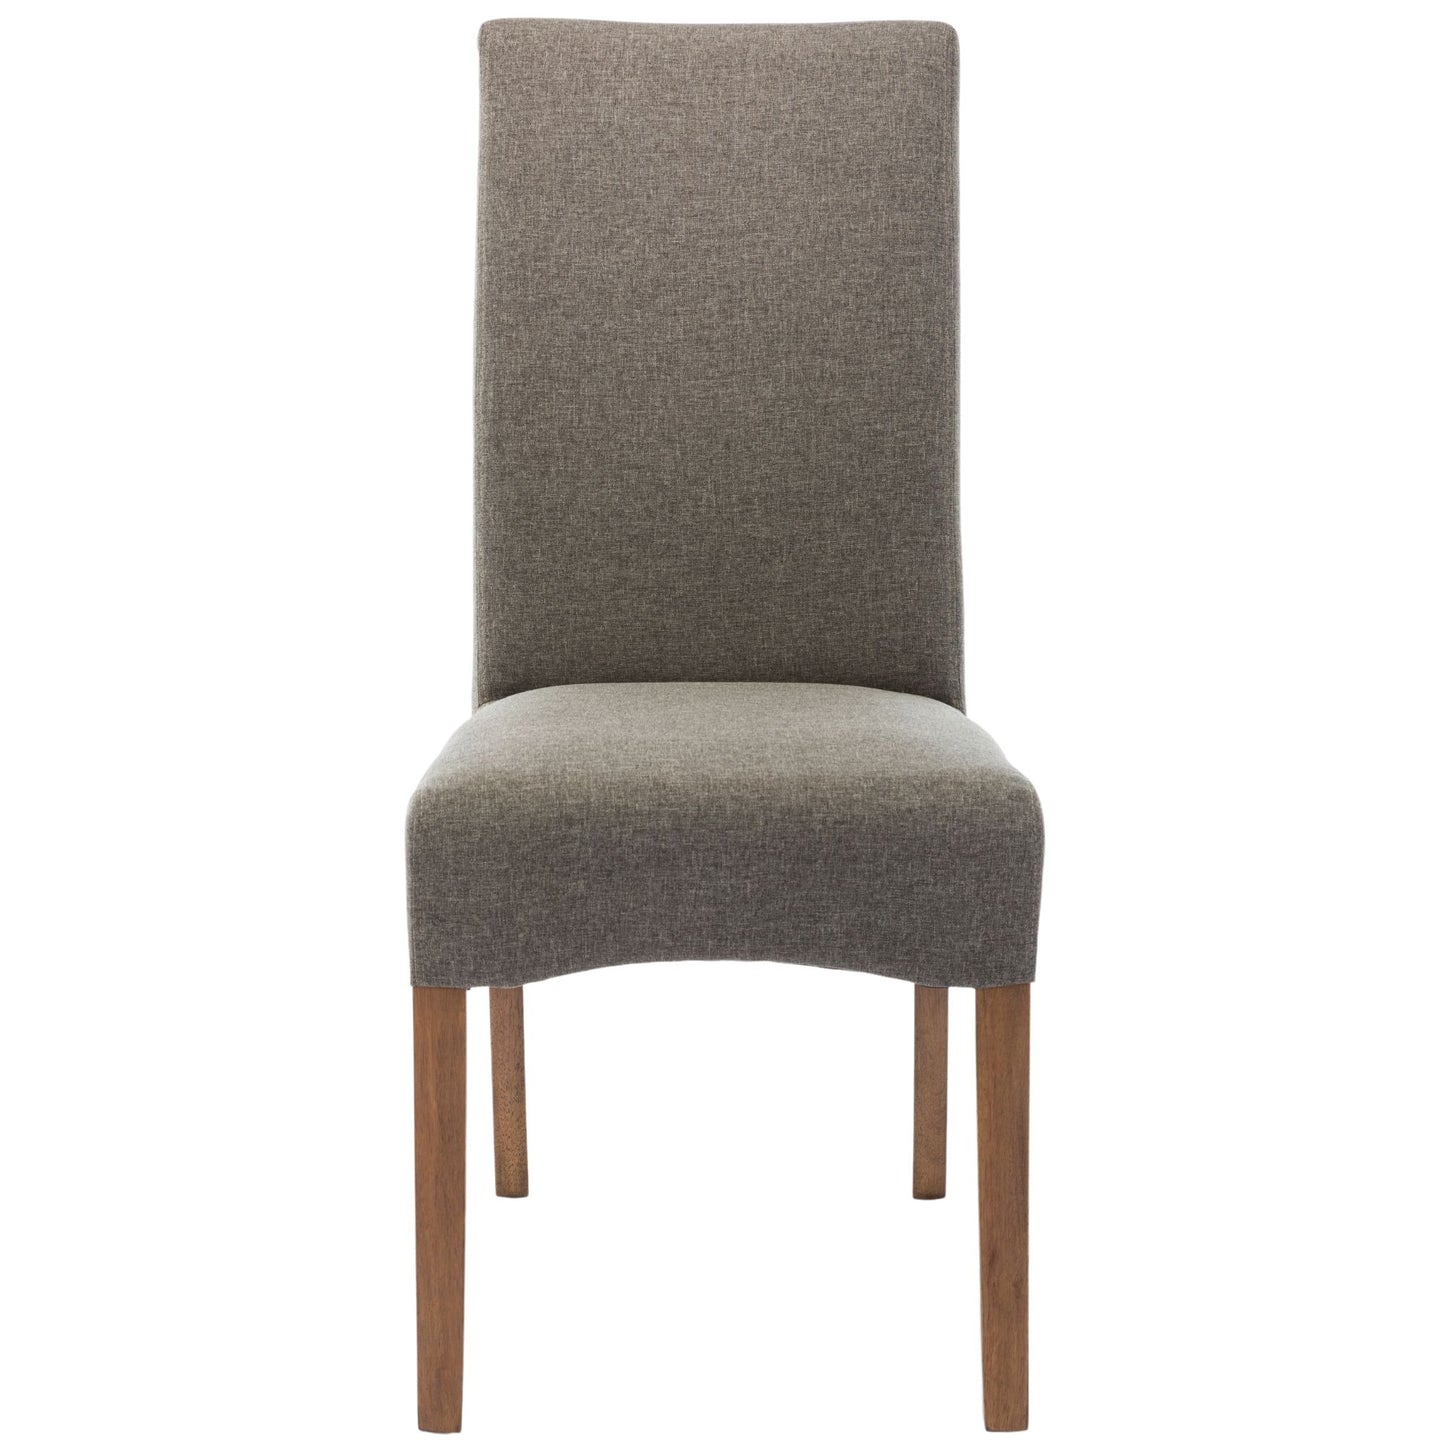 Aksa Fabric Upholstered Dining Chair Set of 4 Solid Pine Wood - Grey